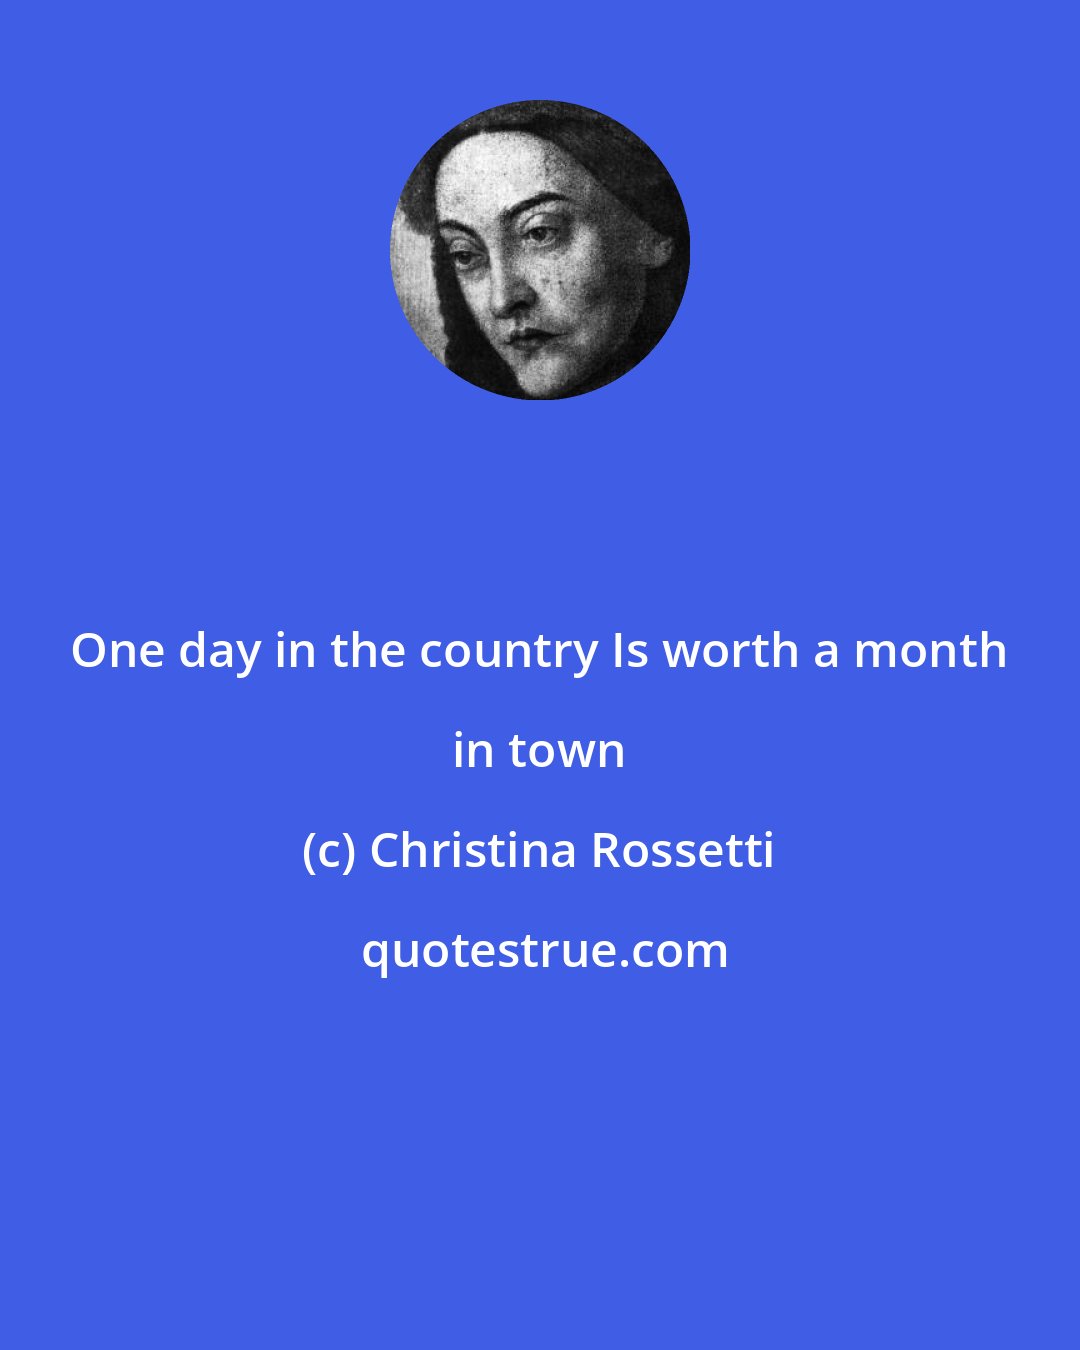 Christina Rossetti: One day in the country Is worth a month in town